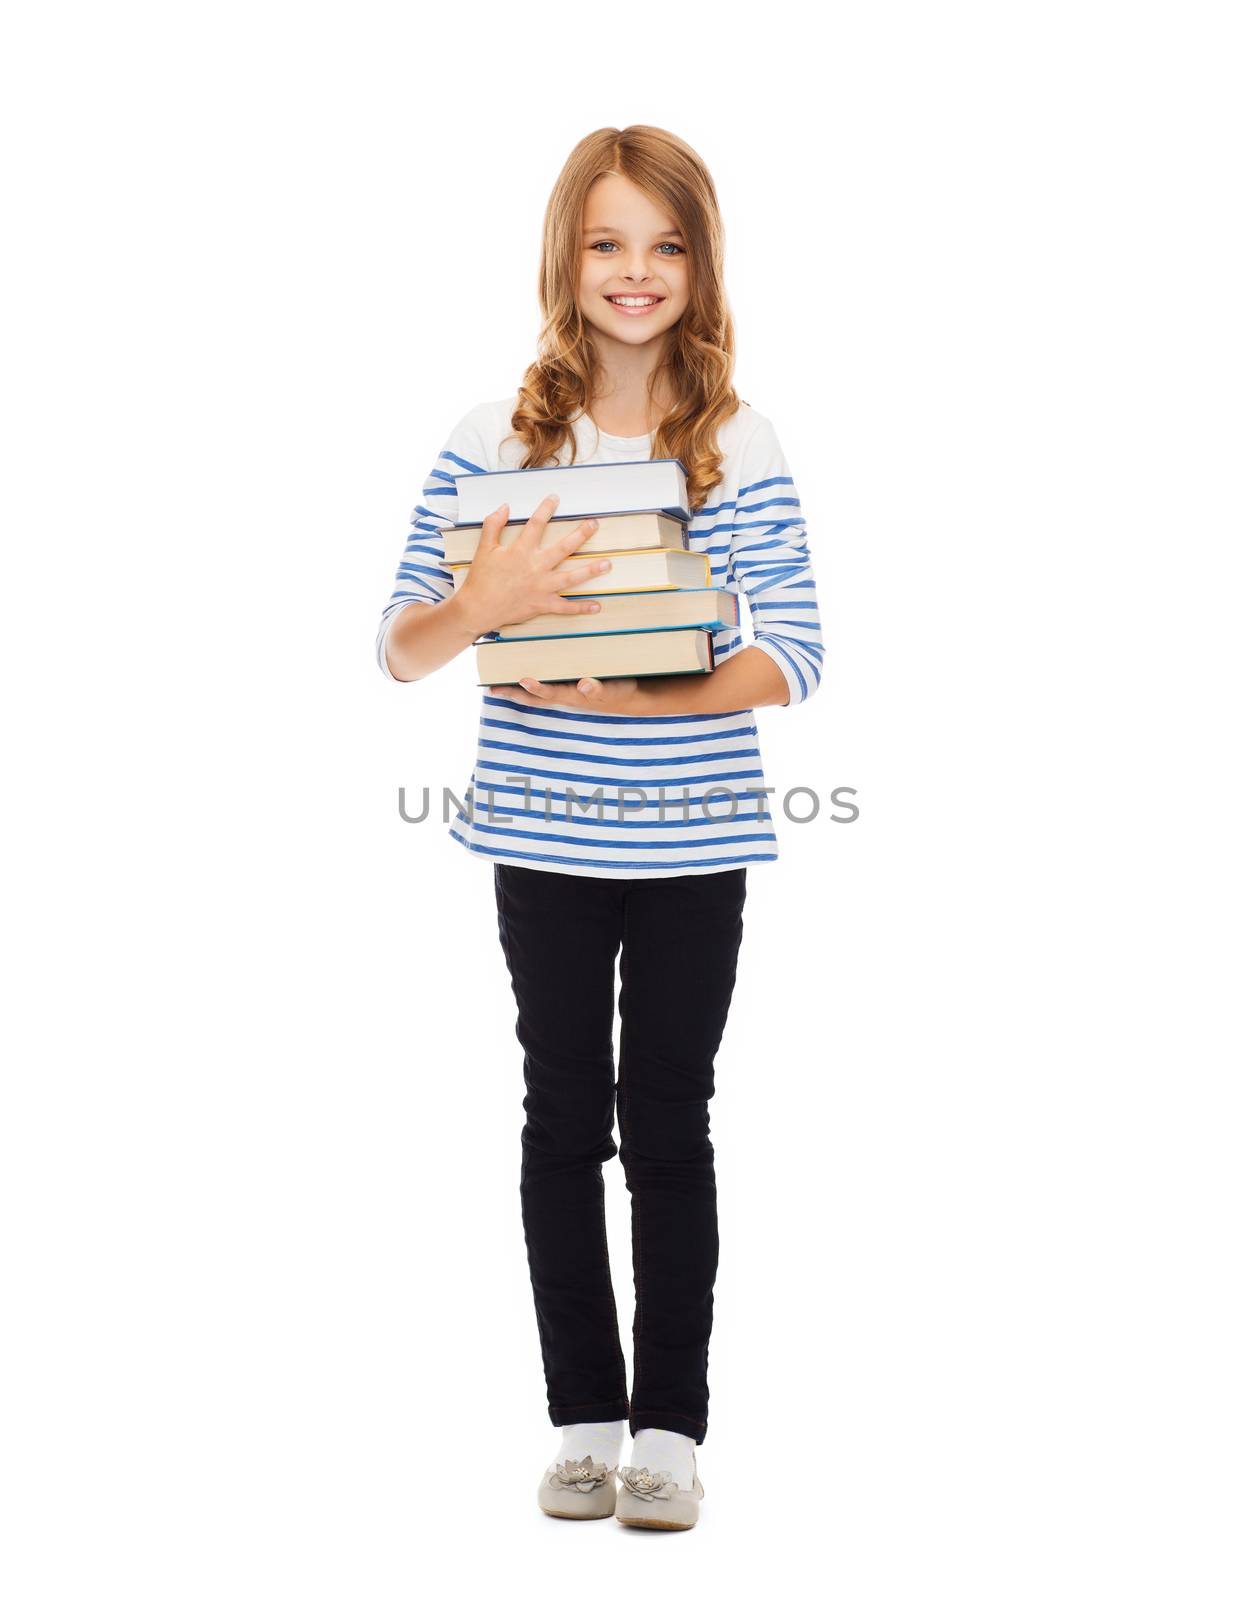 little student girl with many books by dolgachov